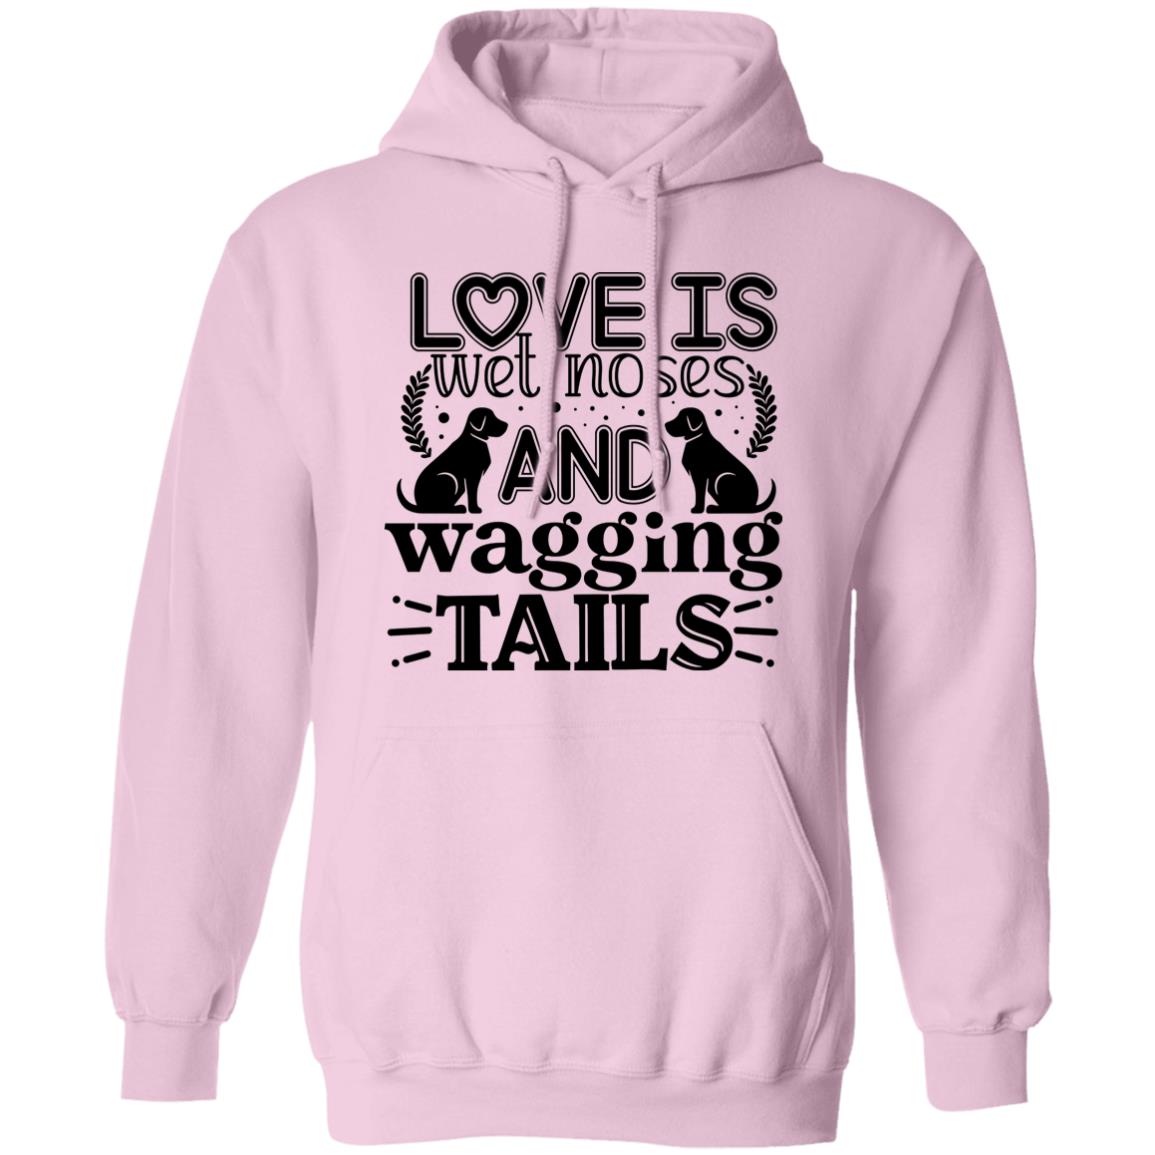 Love Is Wet Noses and Wagging Tails Pullover Hoodie